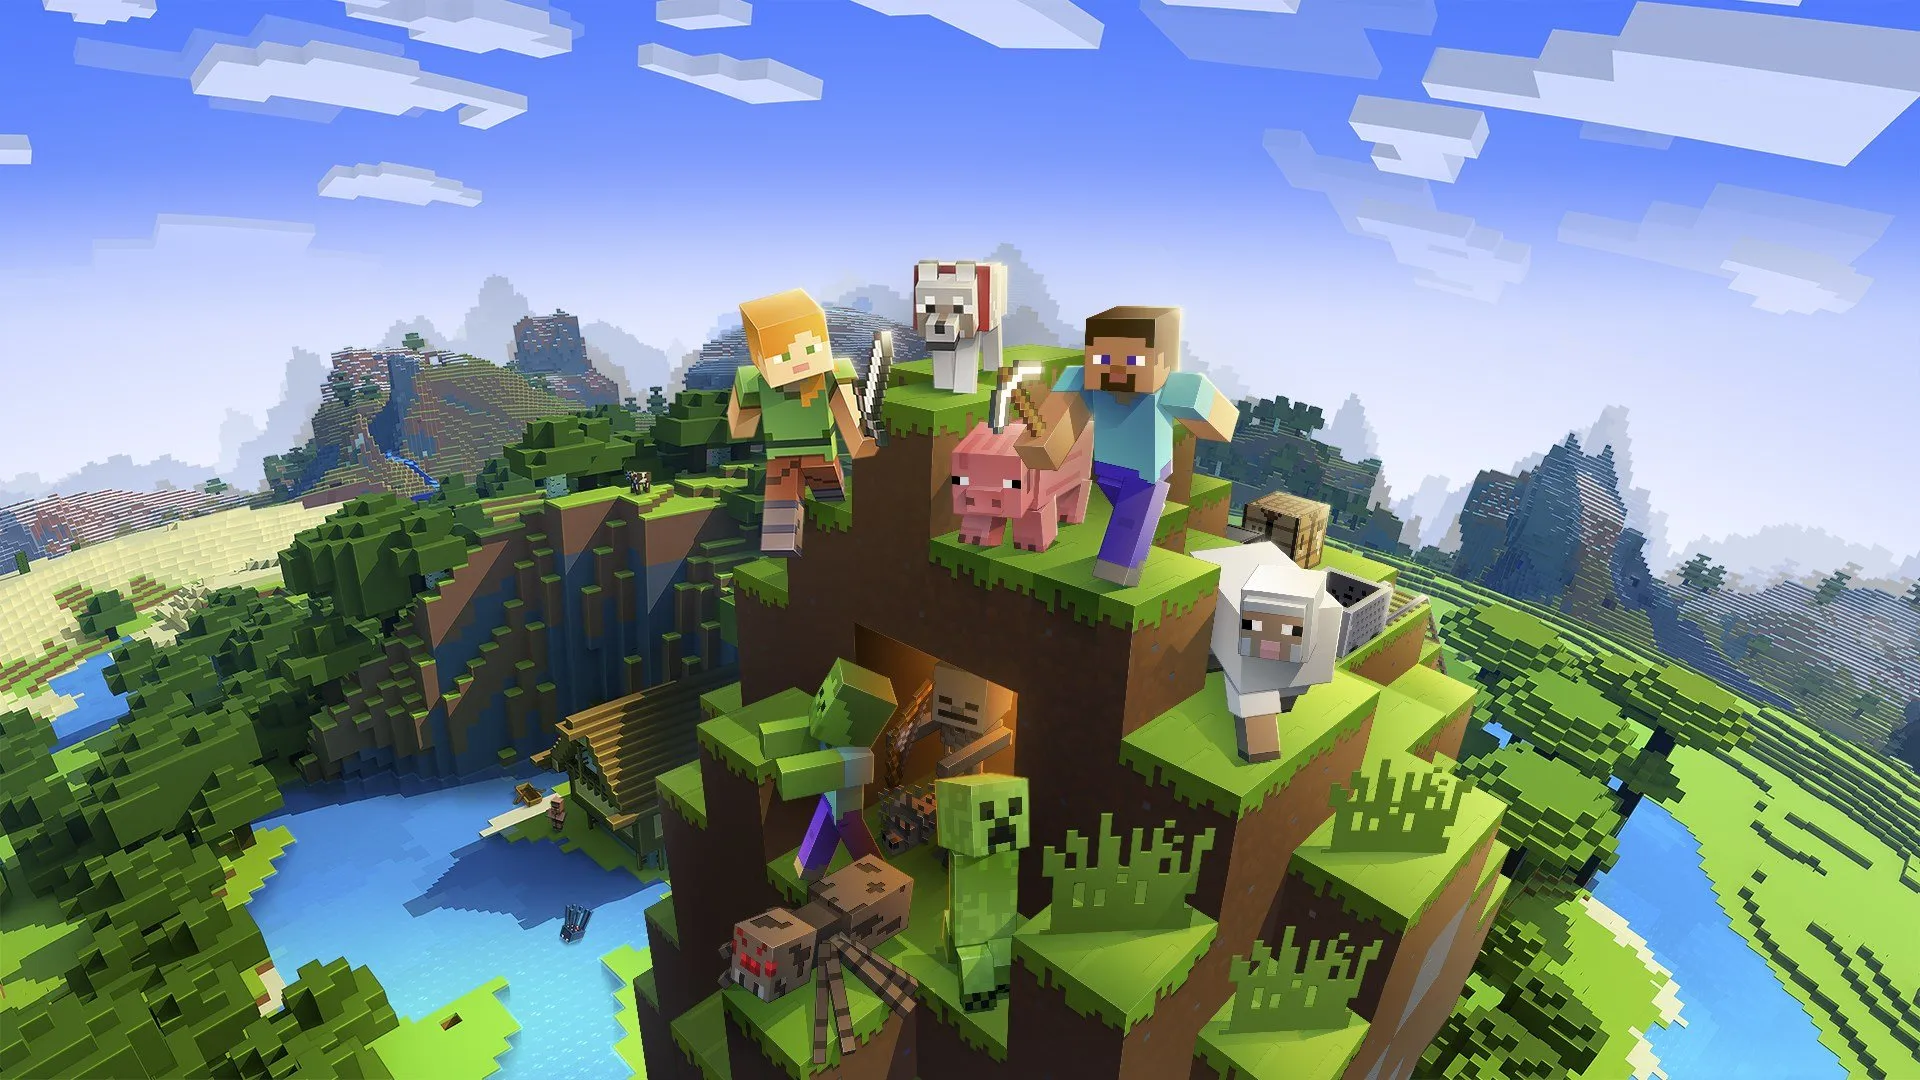 Minecraft Nintendo Switch Review: The Best Version Available